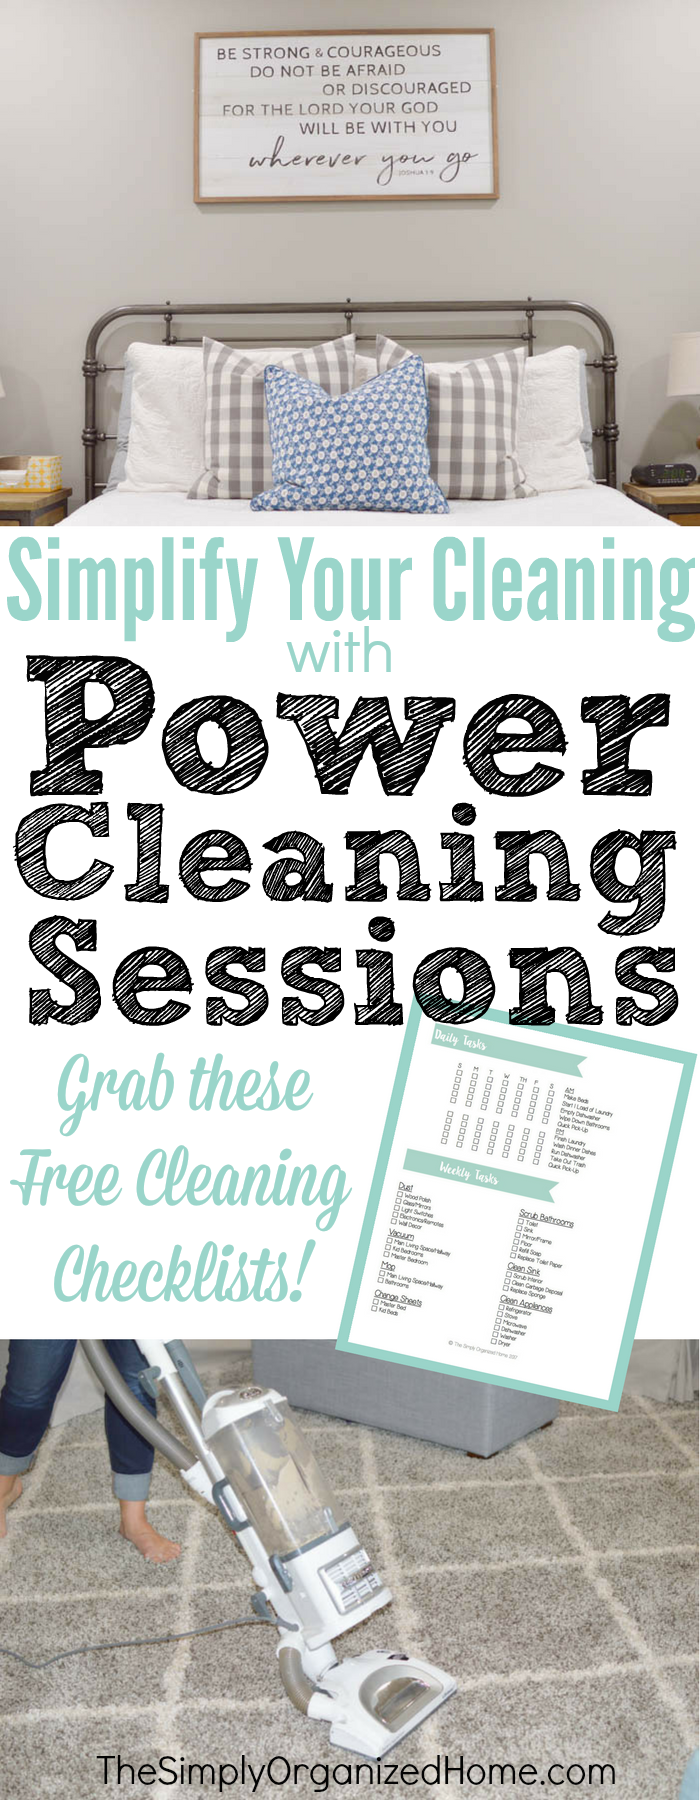 Overwhelmed by your cleaning routine? Simplify things by using power cleaning sessions. Click here to get all the details!